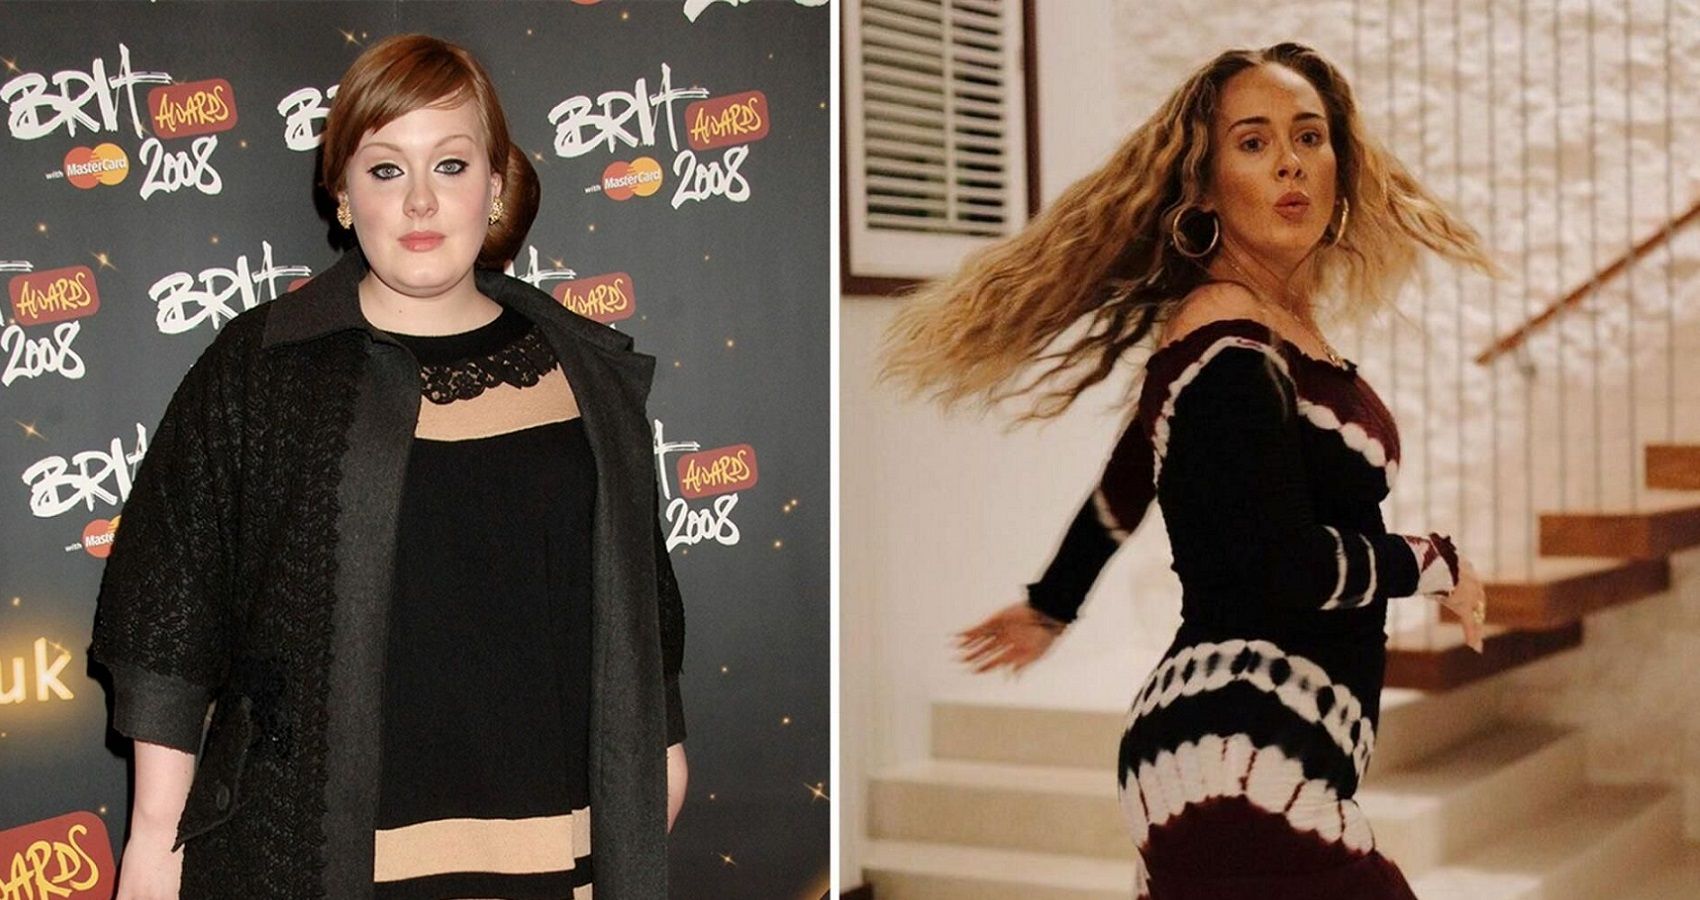 Exactly How Adele Lost 100 Pounds - Adele Weight Loss 2022